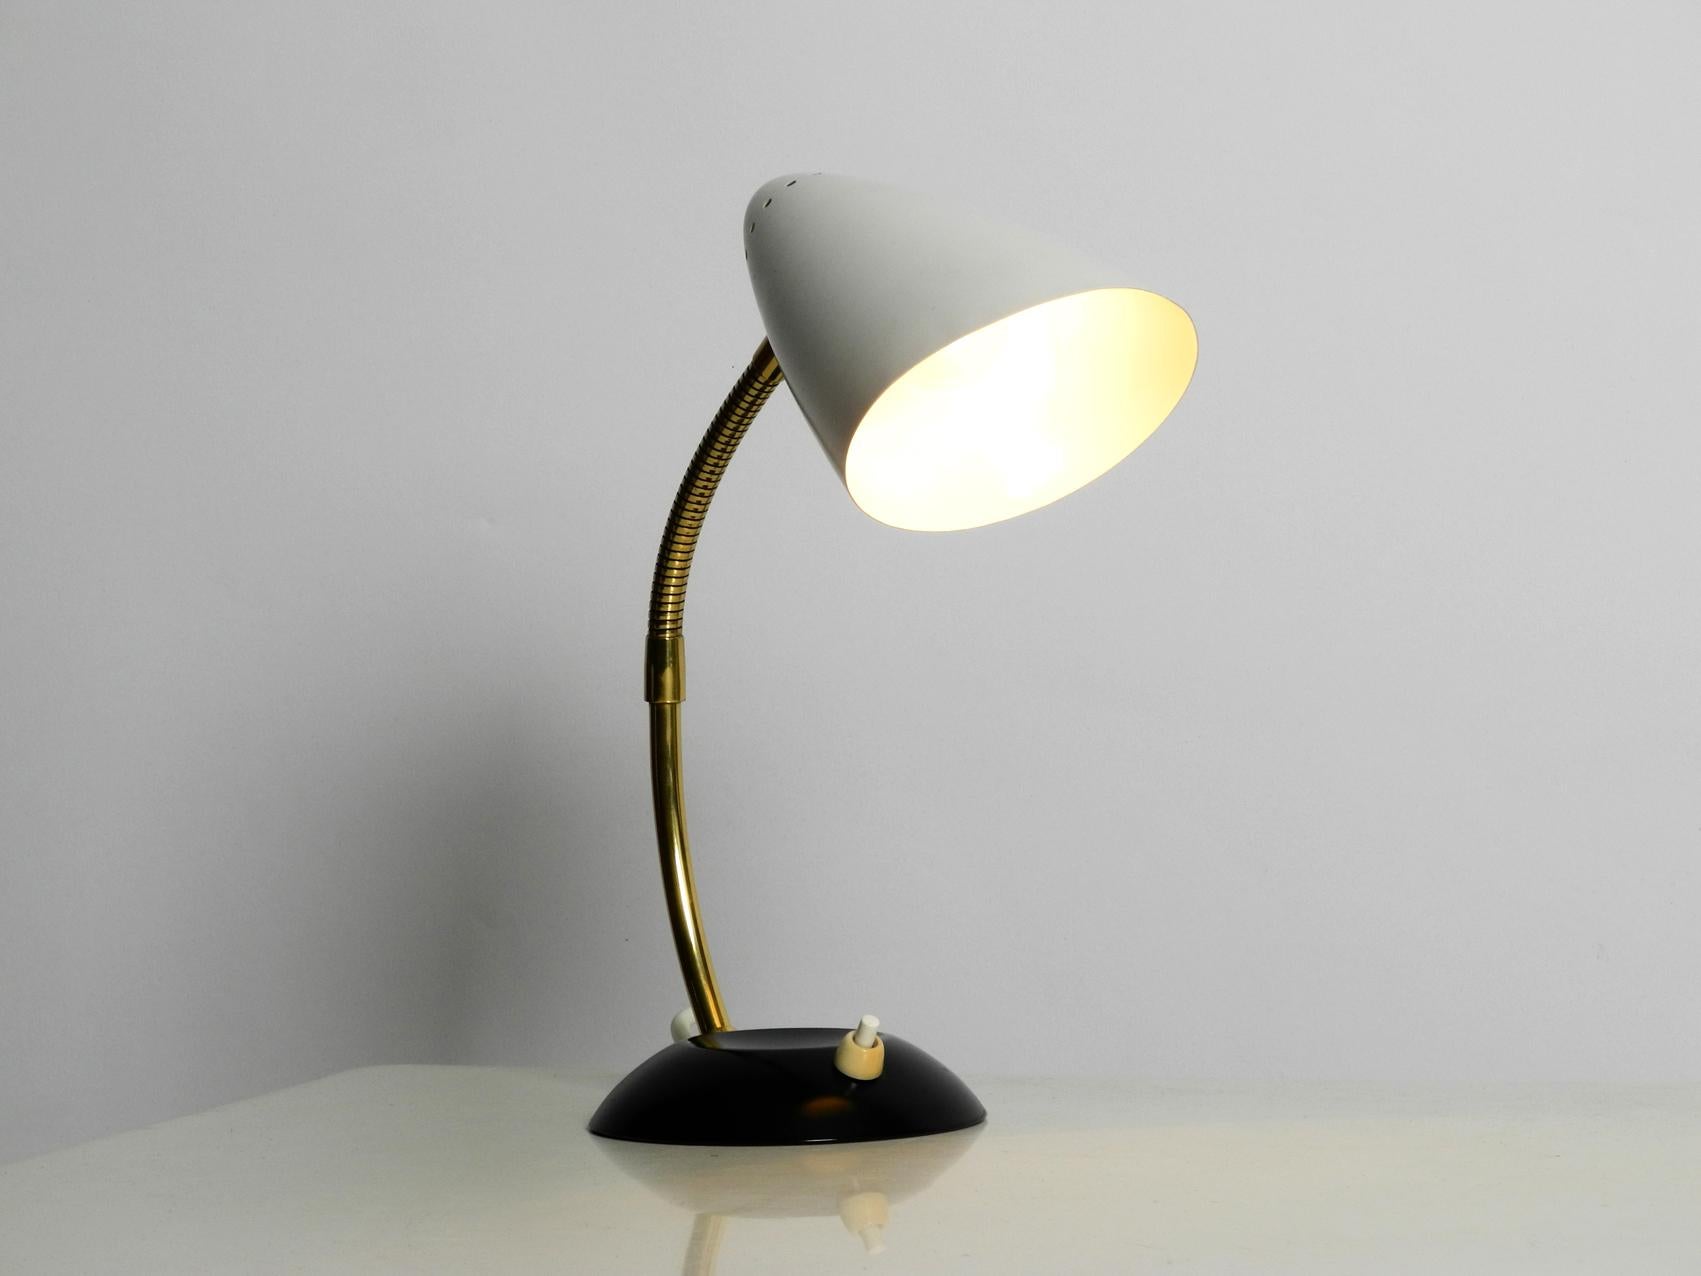 Very beautiful Classic Mid-Century Modern table lamp by Kaiser Leuchten. 
Very nice striking Minimalist and typical midcentury design with a fantastic patina. 
Shade and base are made of metal, painted in black and white. The neck is made of